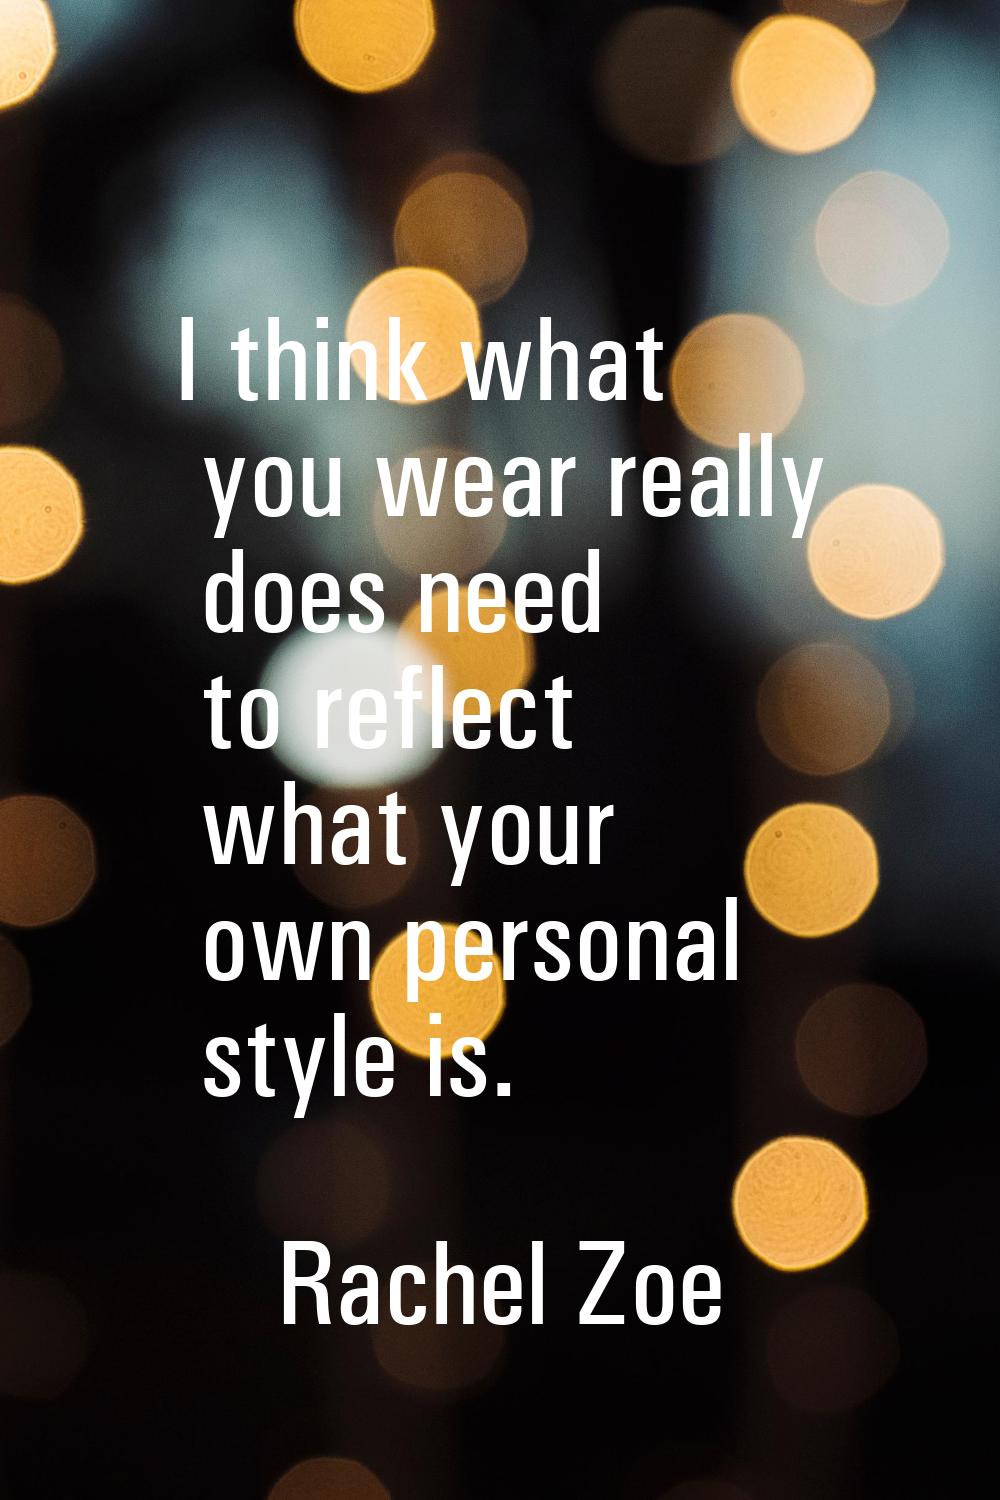 I think what you wear really does need to reflect what your own personal style is.